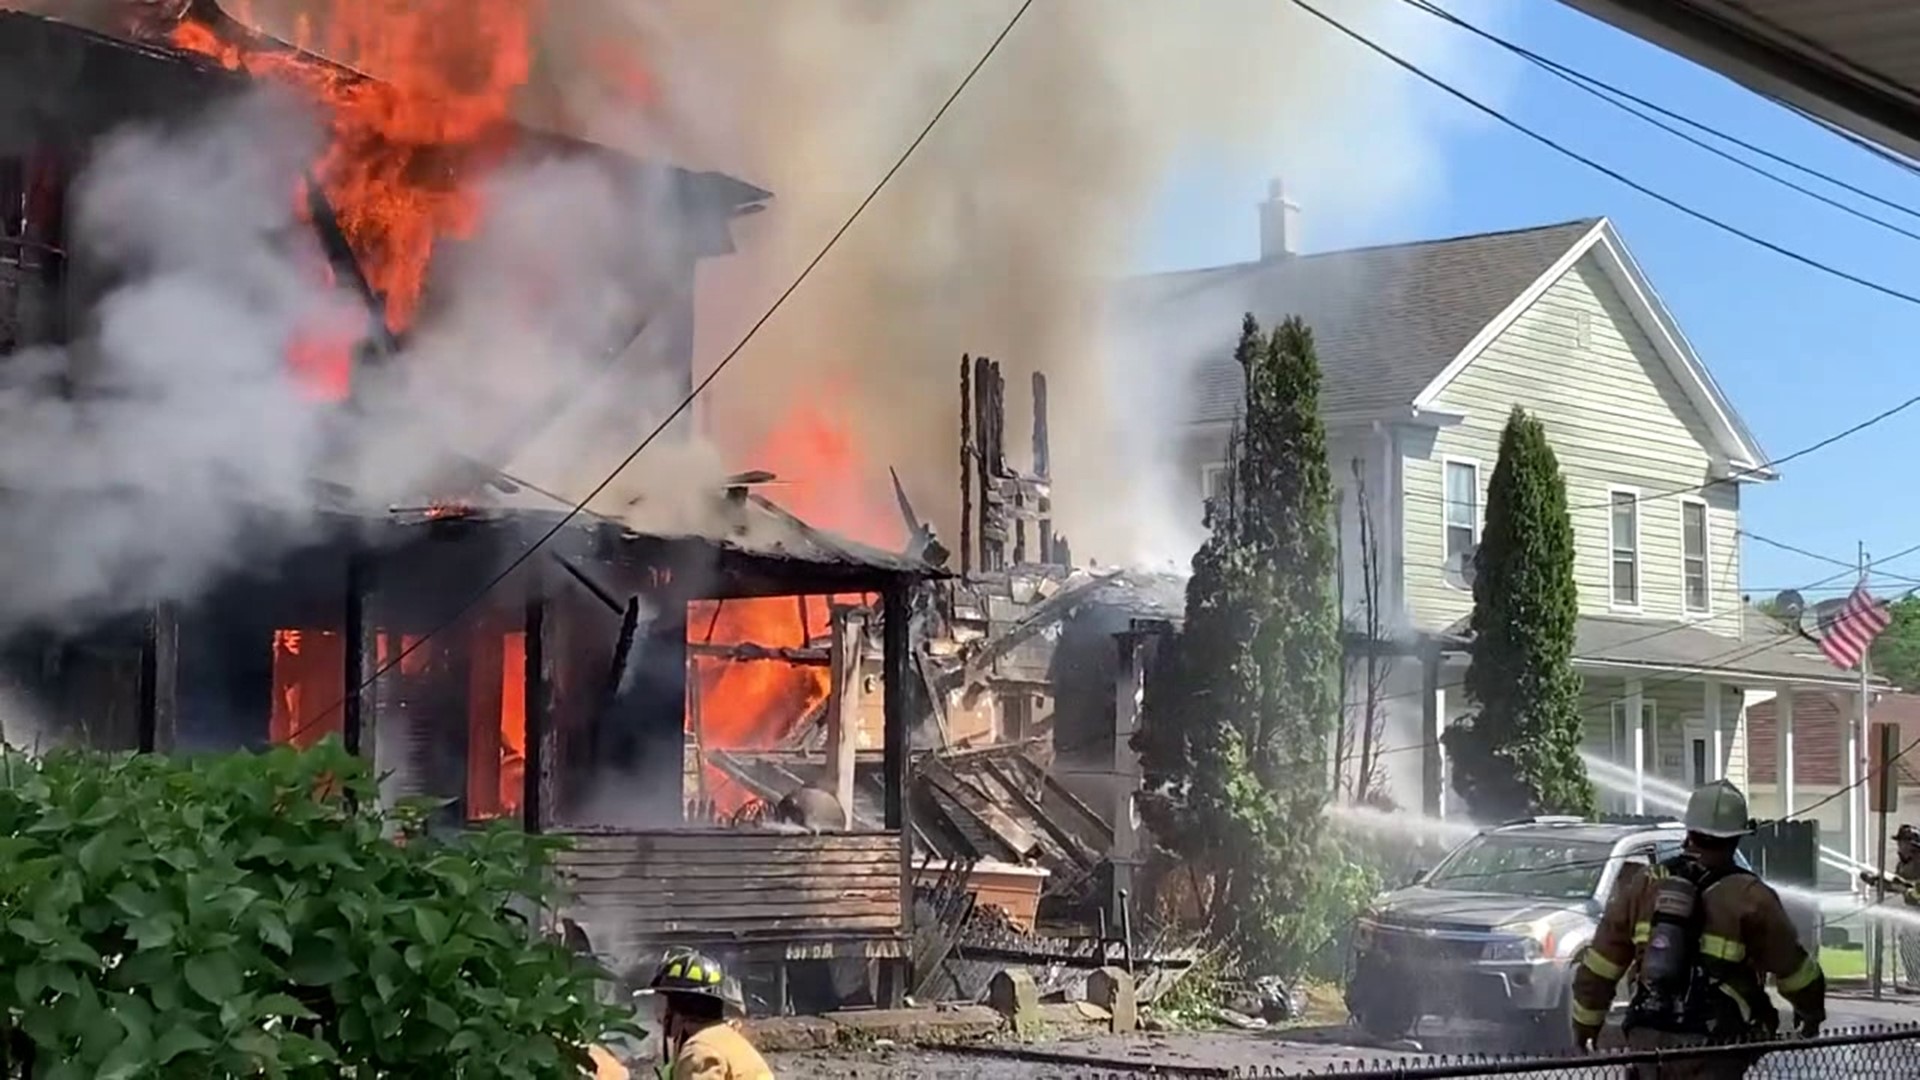 There's new information from the Luzerne County coroner's office about Sunday's deadly fire in Plymouth.